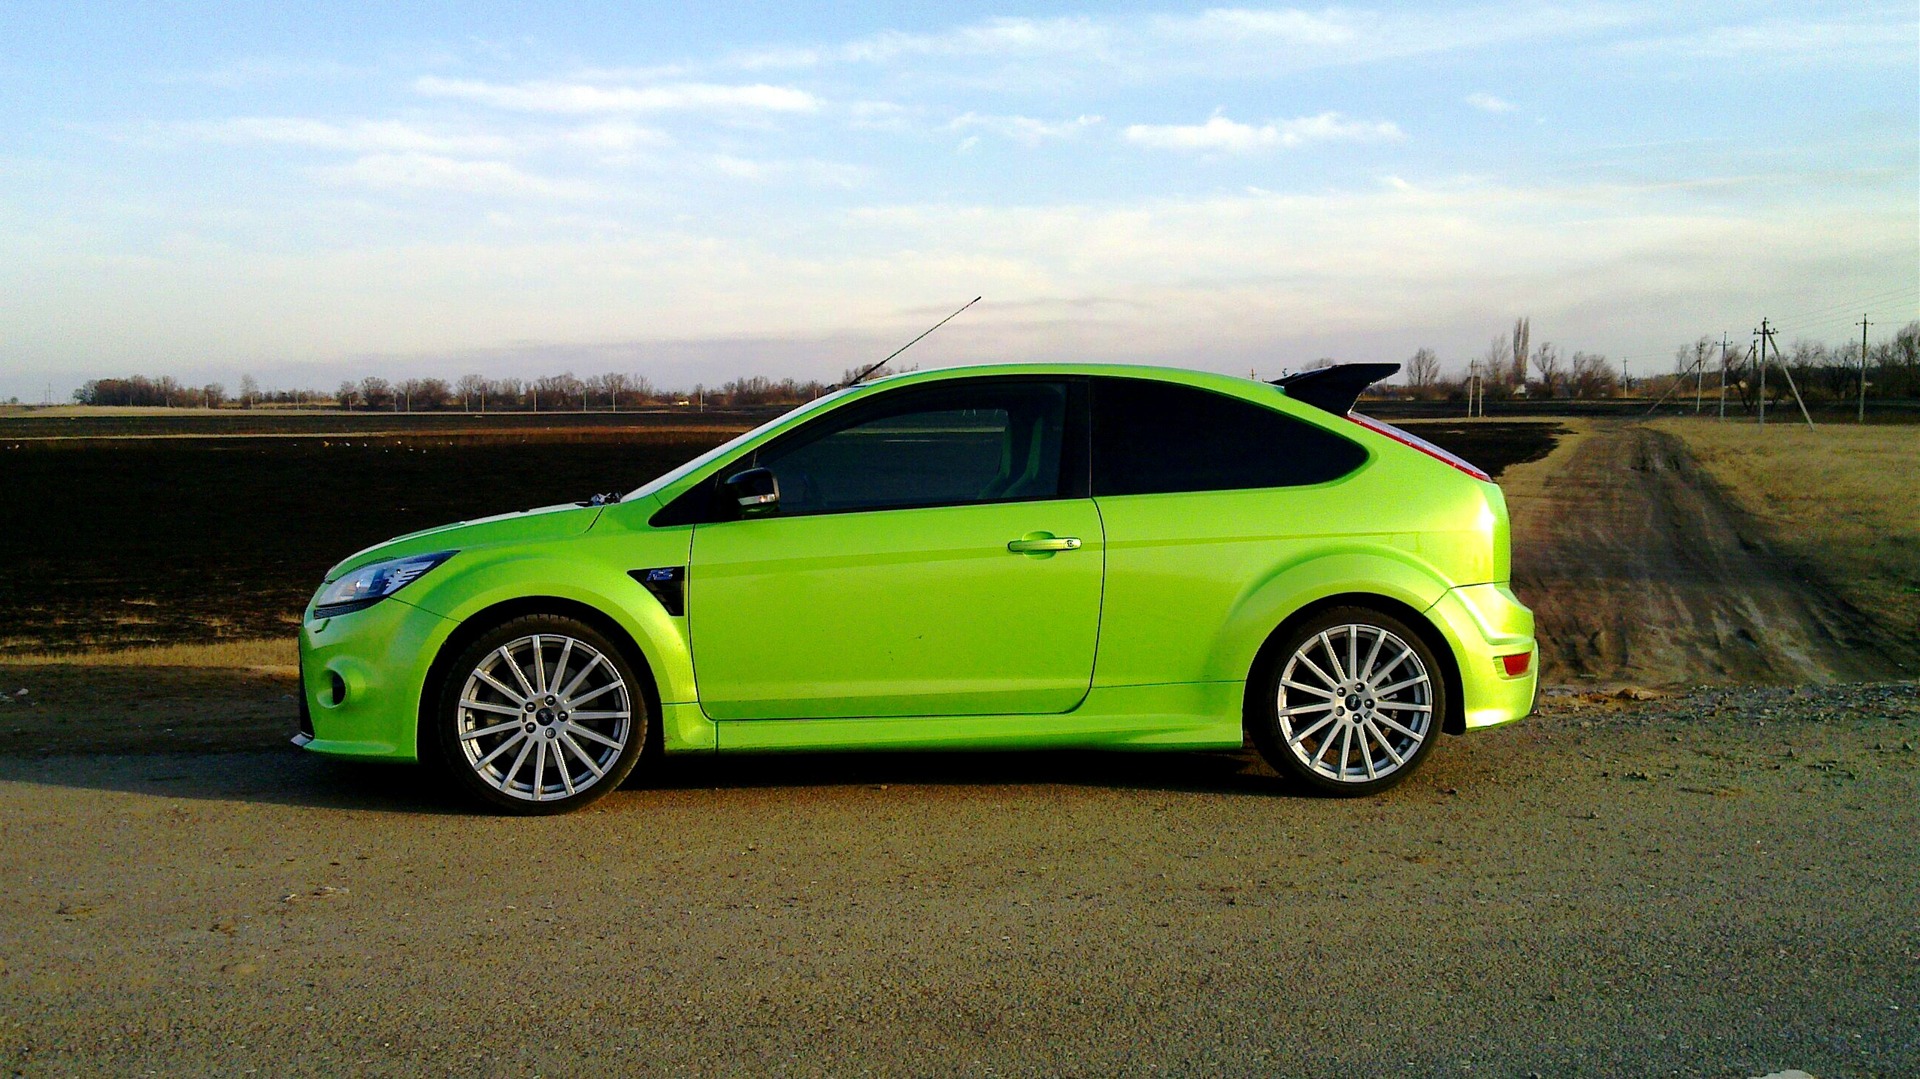 Ford Focus RS, 2 Green